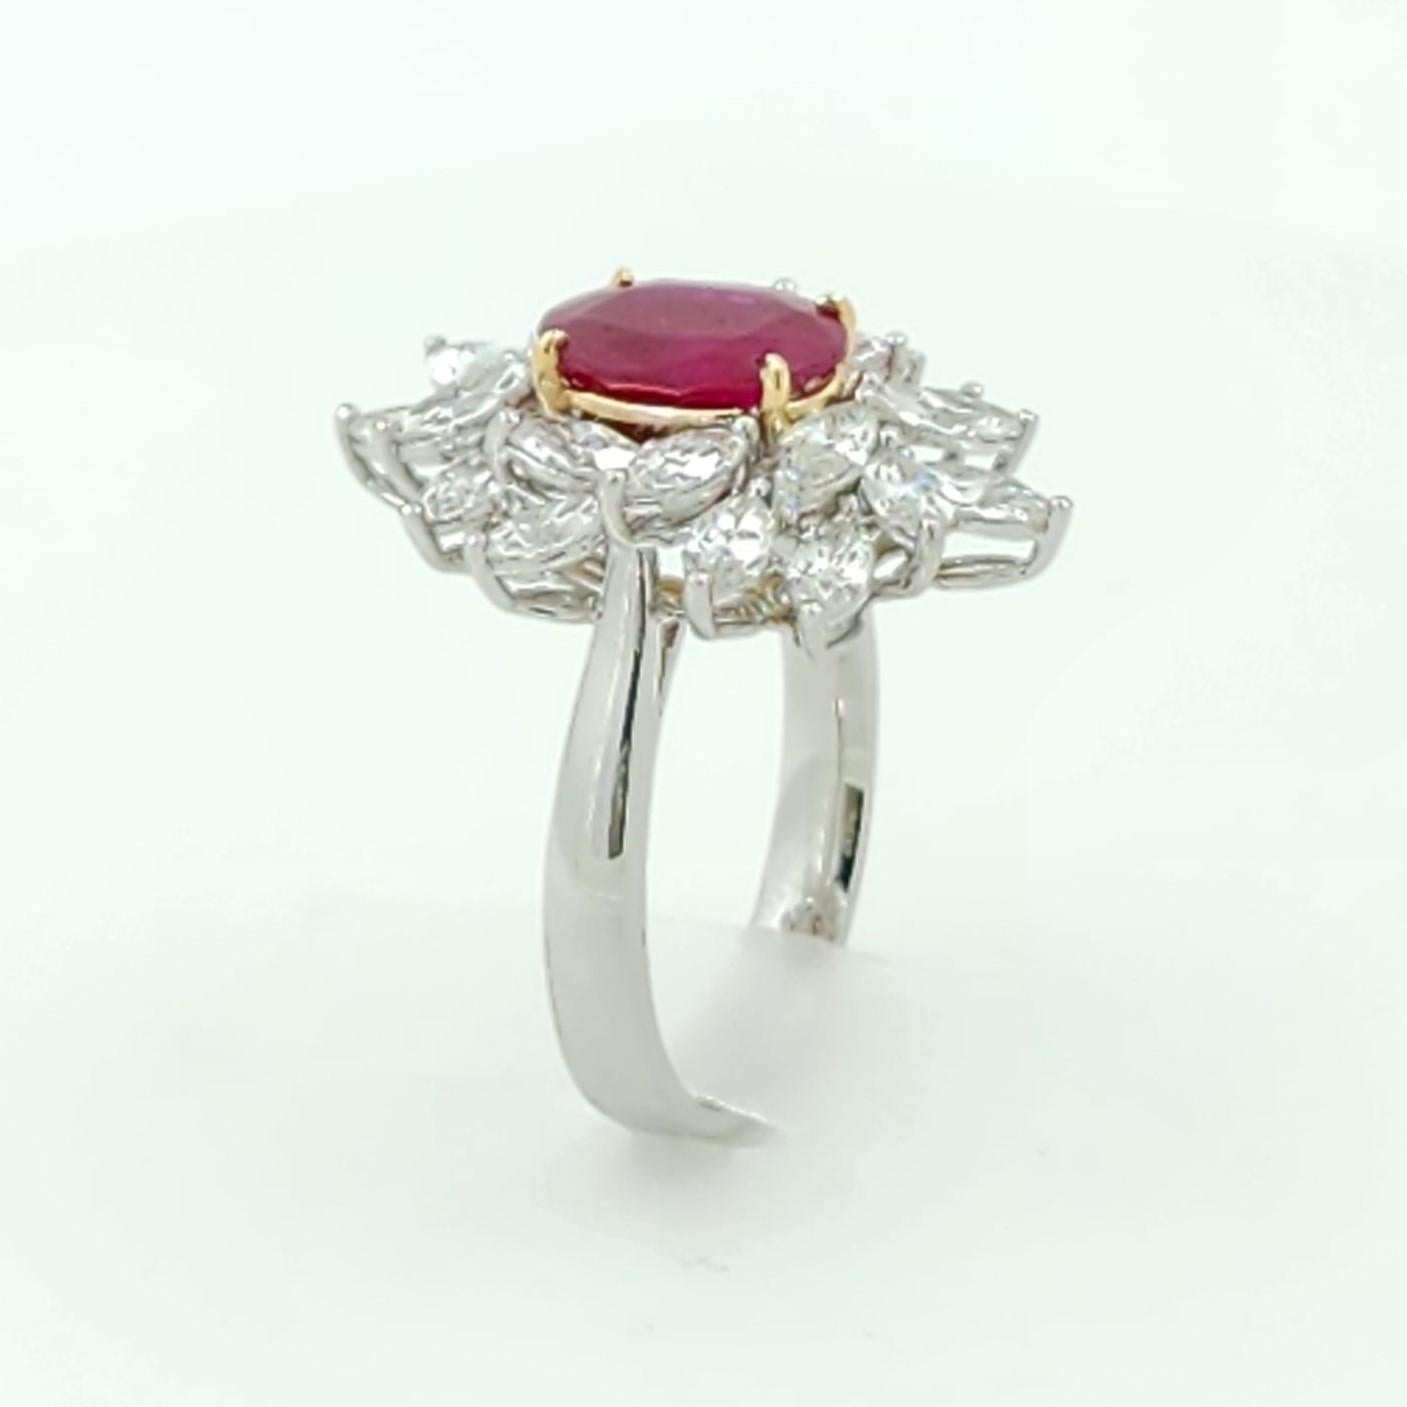 Contemporary GIA Certified 2.11 Carat Burma Ruby Diamond Ring in 18 Karat White Gold For Sale